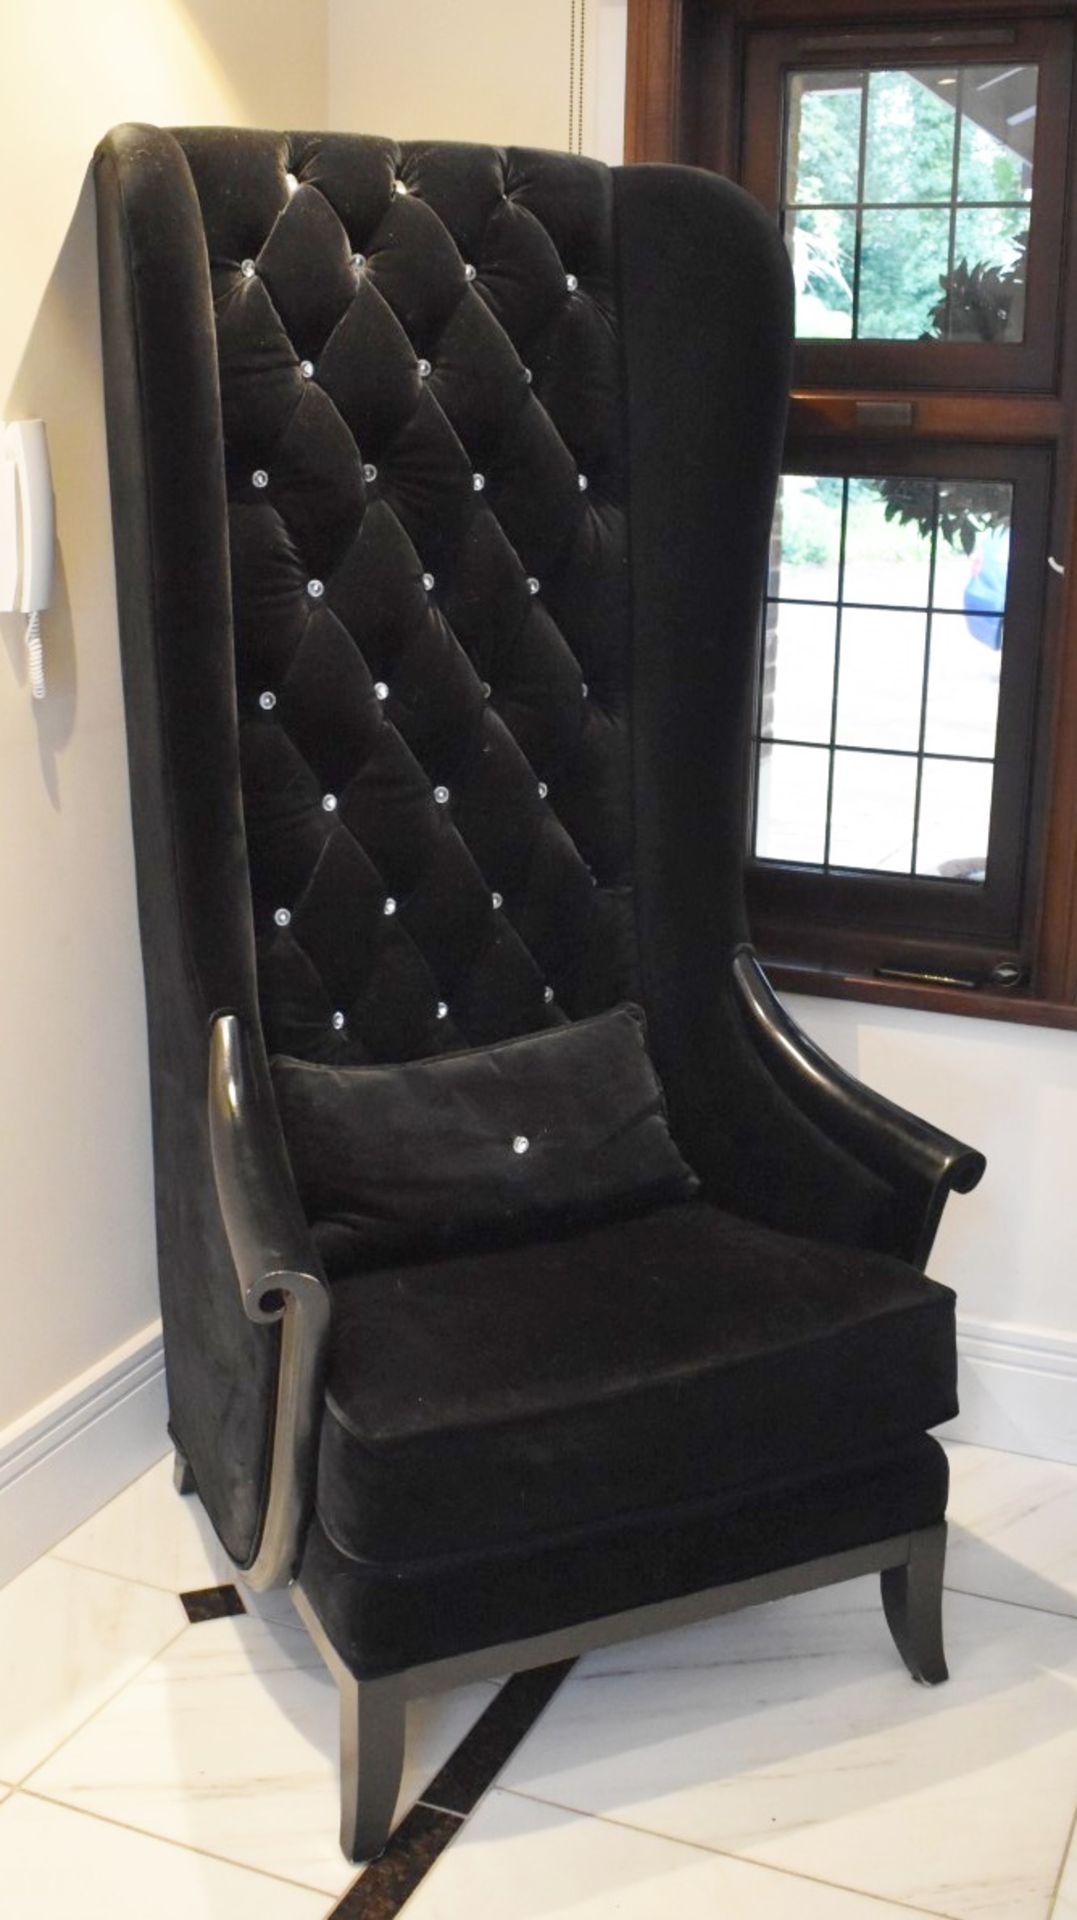 1 x Chesterfield Style Tall Wingback Armchair Upholstering in Black Velvet With Faux Crystal Studs - Image 7 of 7